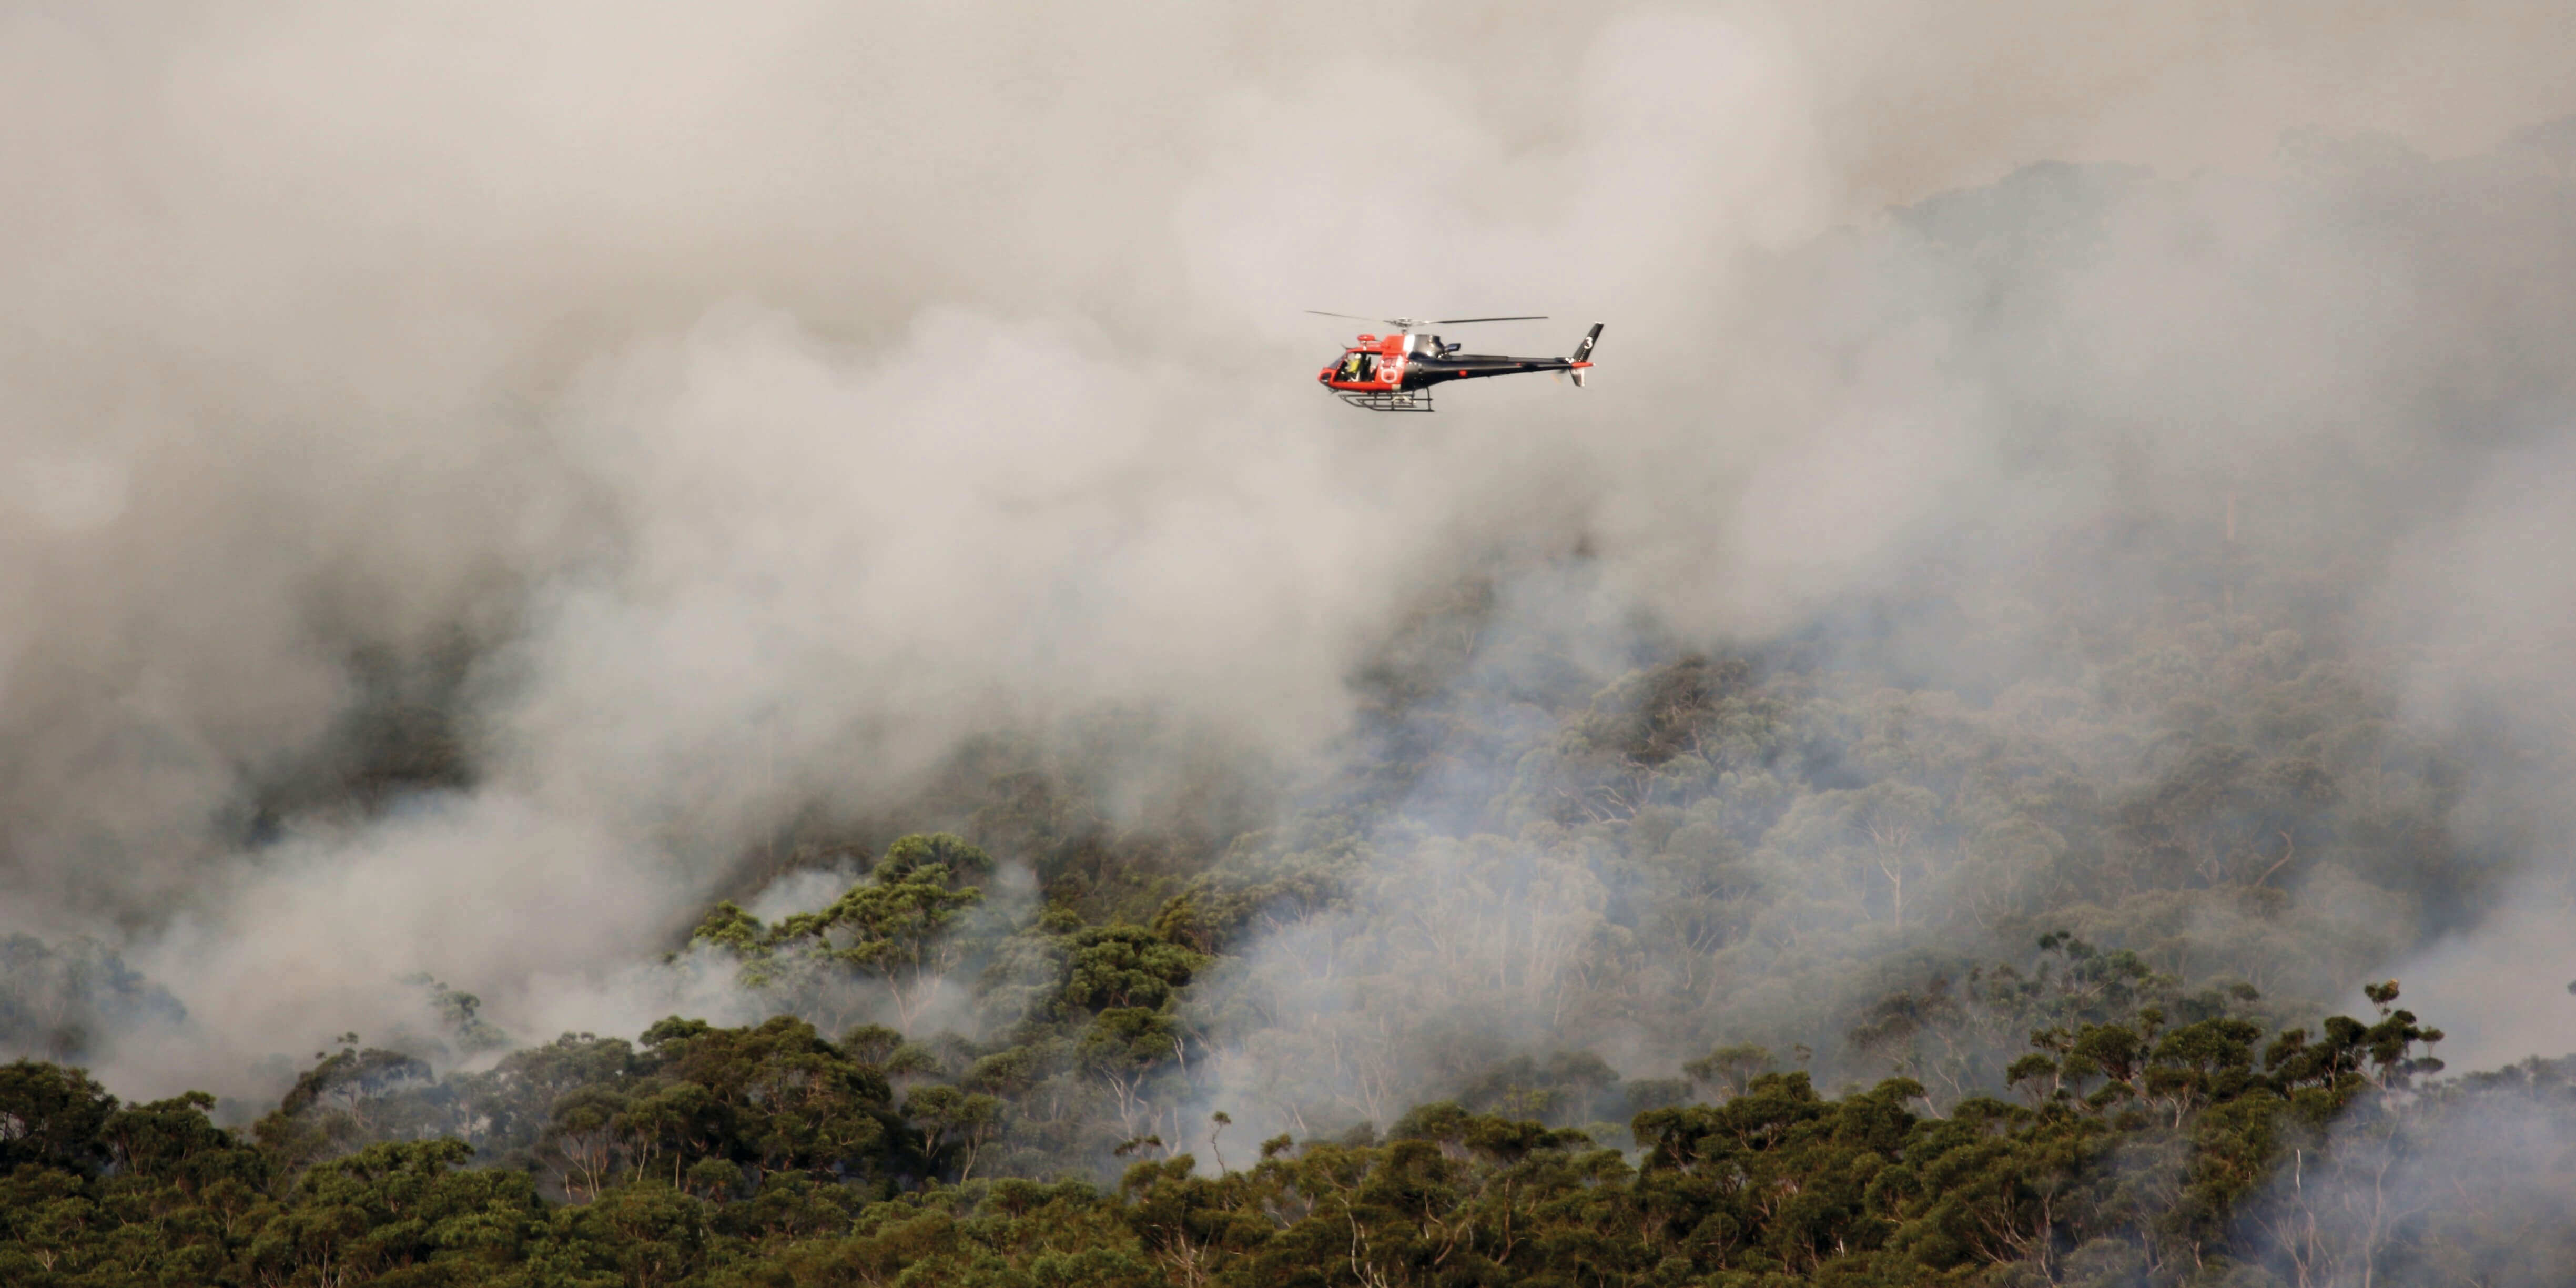 Helicopter flying through smoke above a bushfire